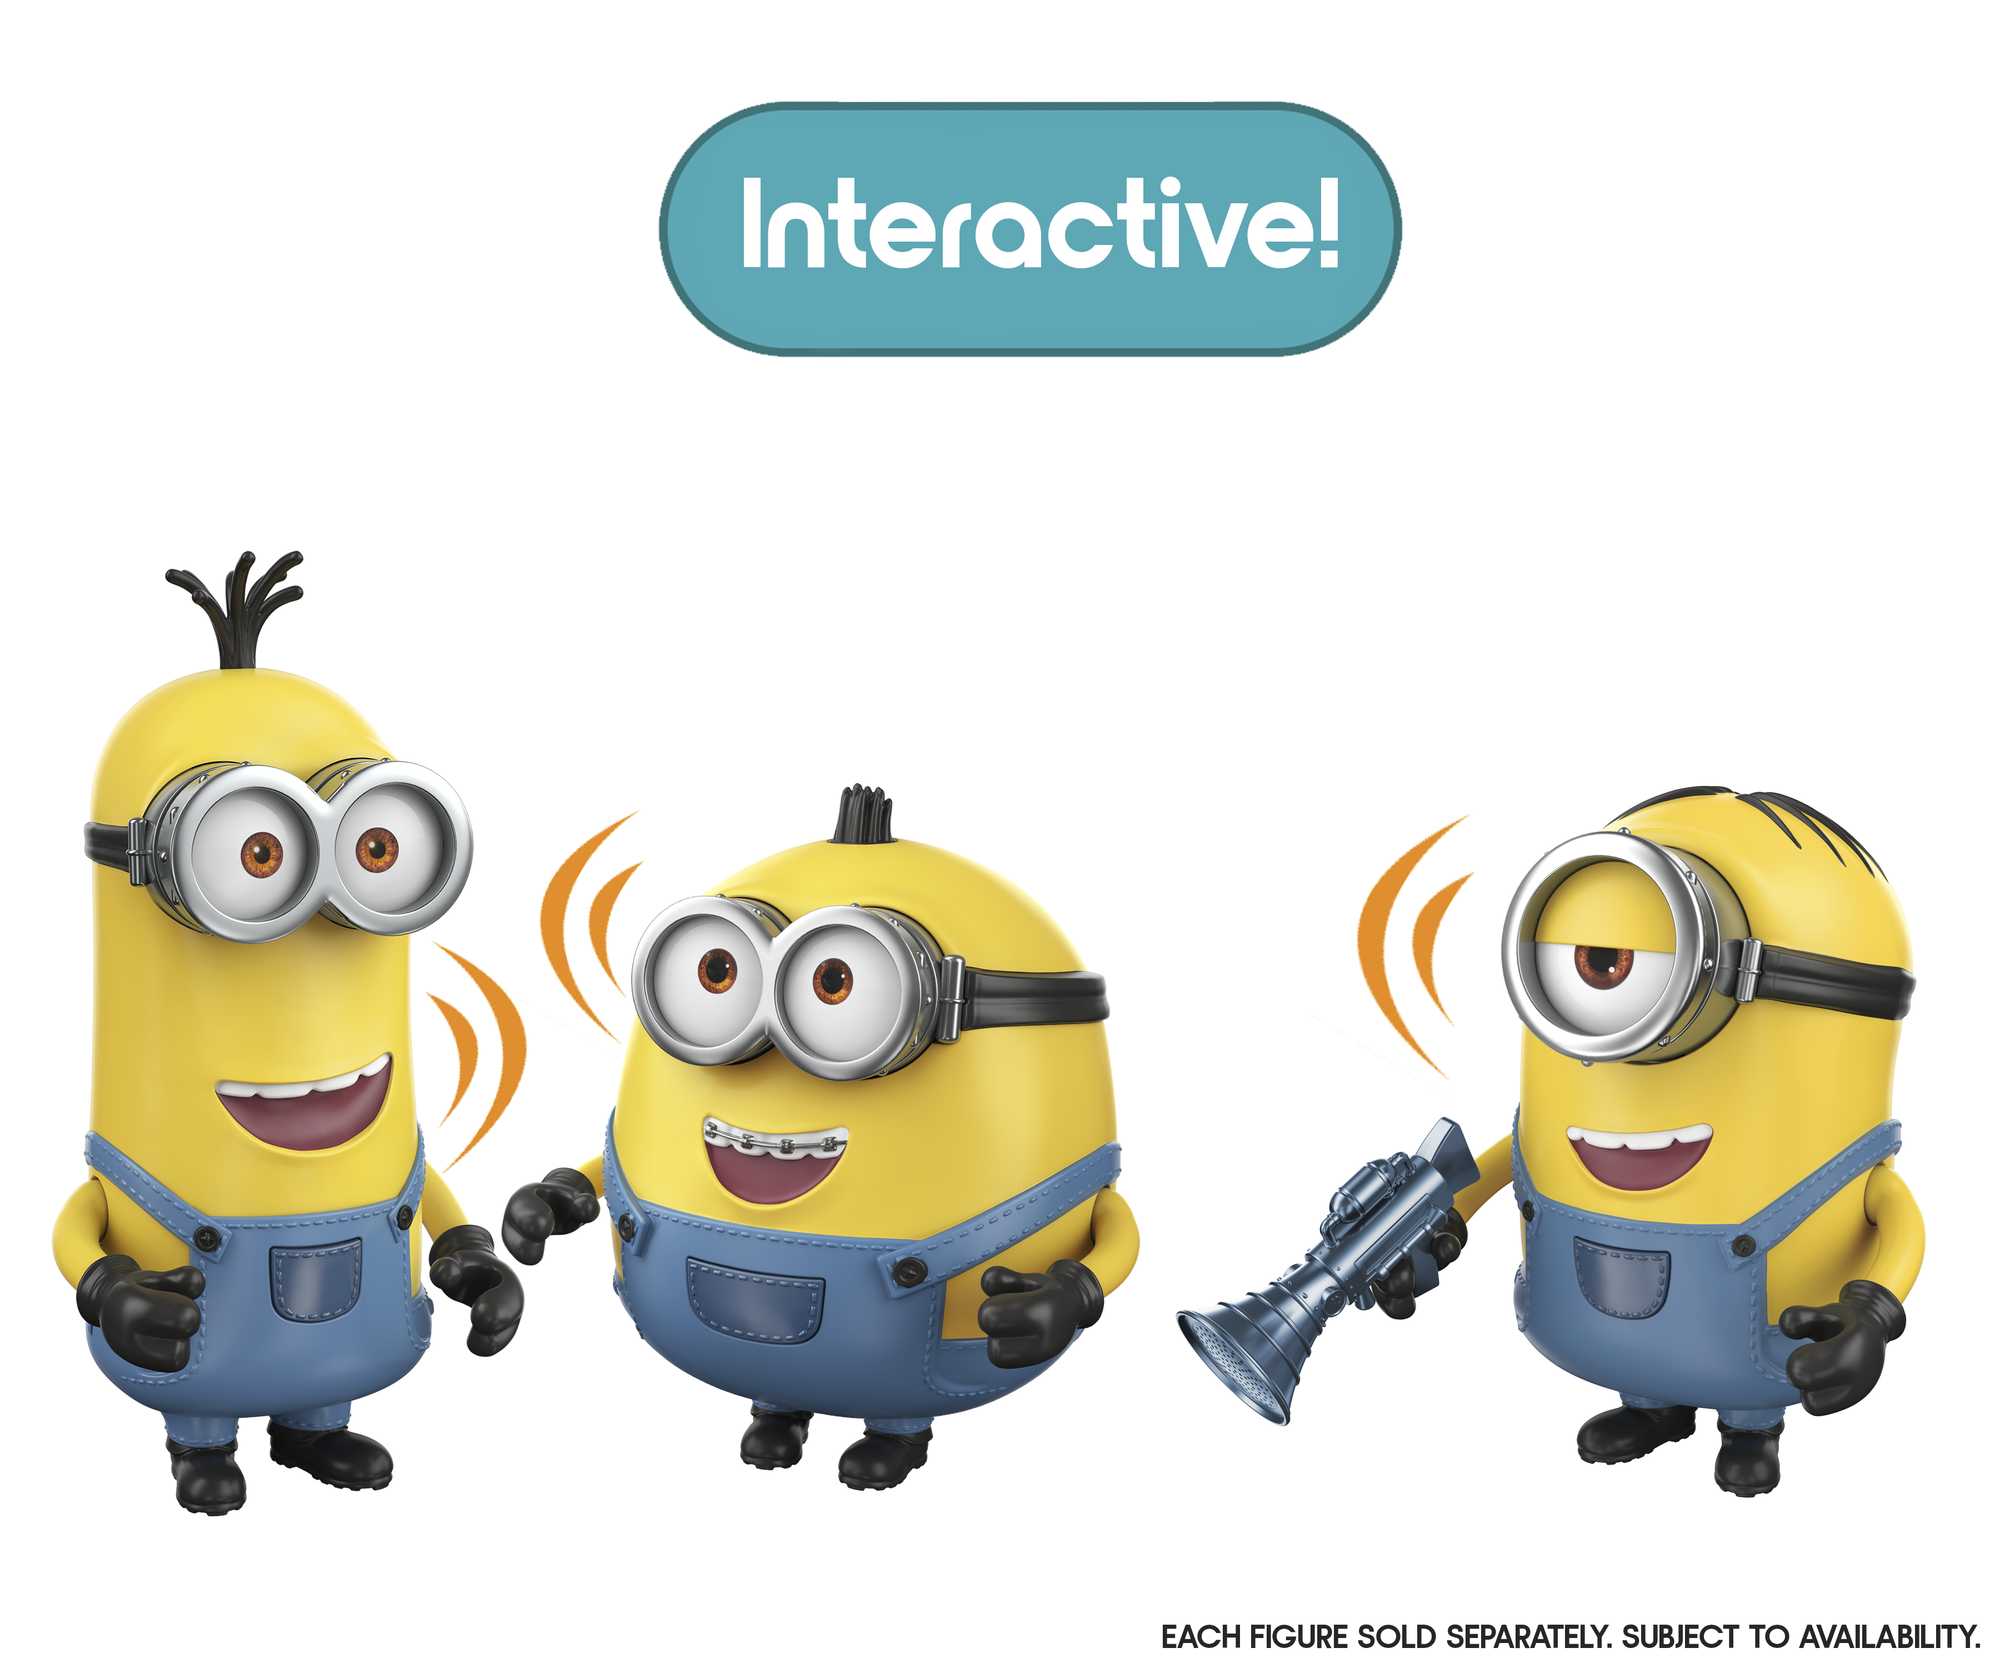 Minions: The Rise of Gru Sing 'N Babble Stuart Interactive Action